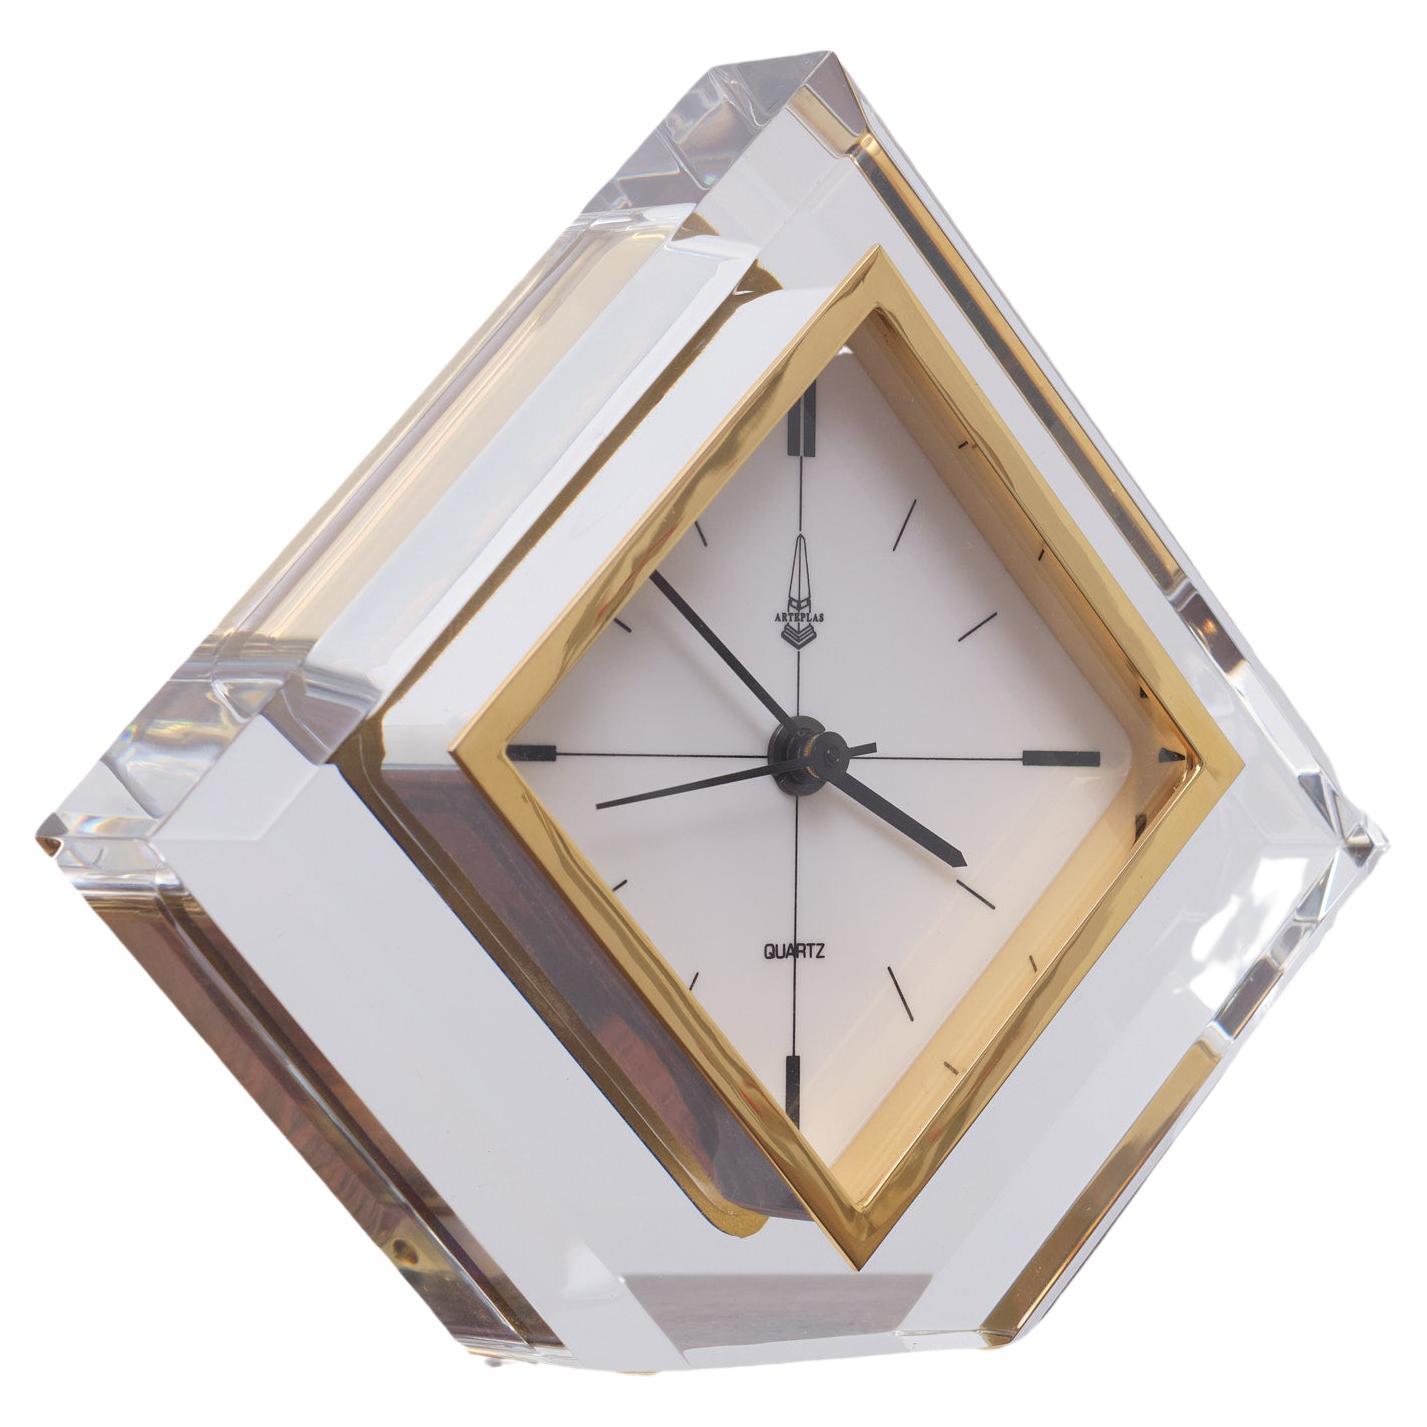 Very rare Lucite Triangle shaped table clock. Comes with a Quarts timepiece 
Manufactured by Arteplas Spain 1970s Good quality piece.